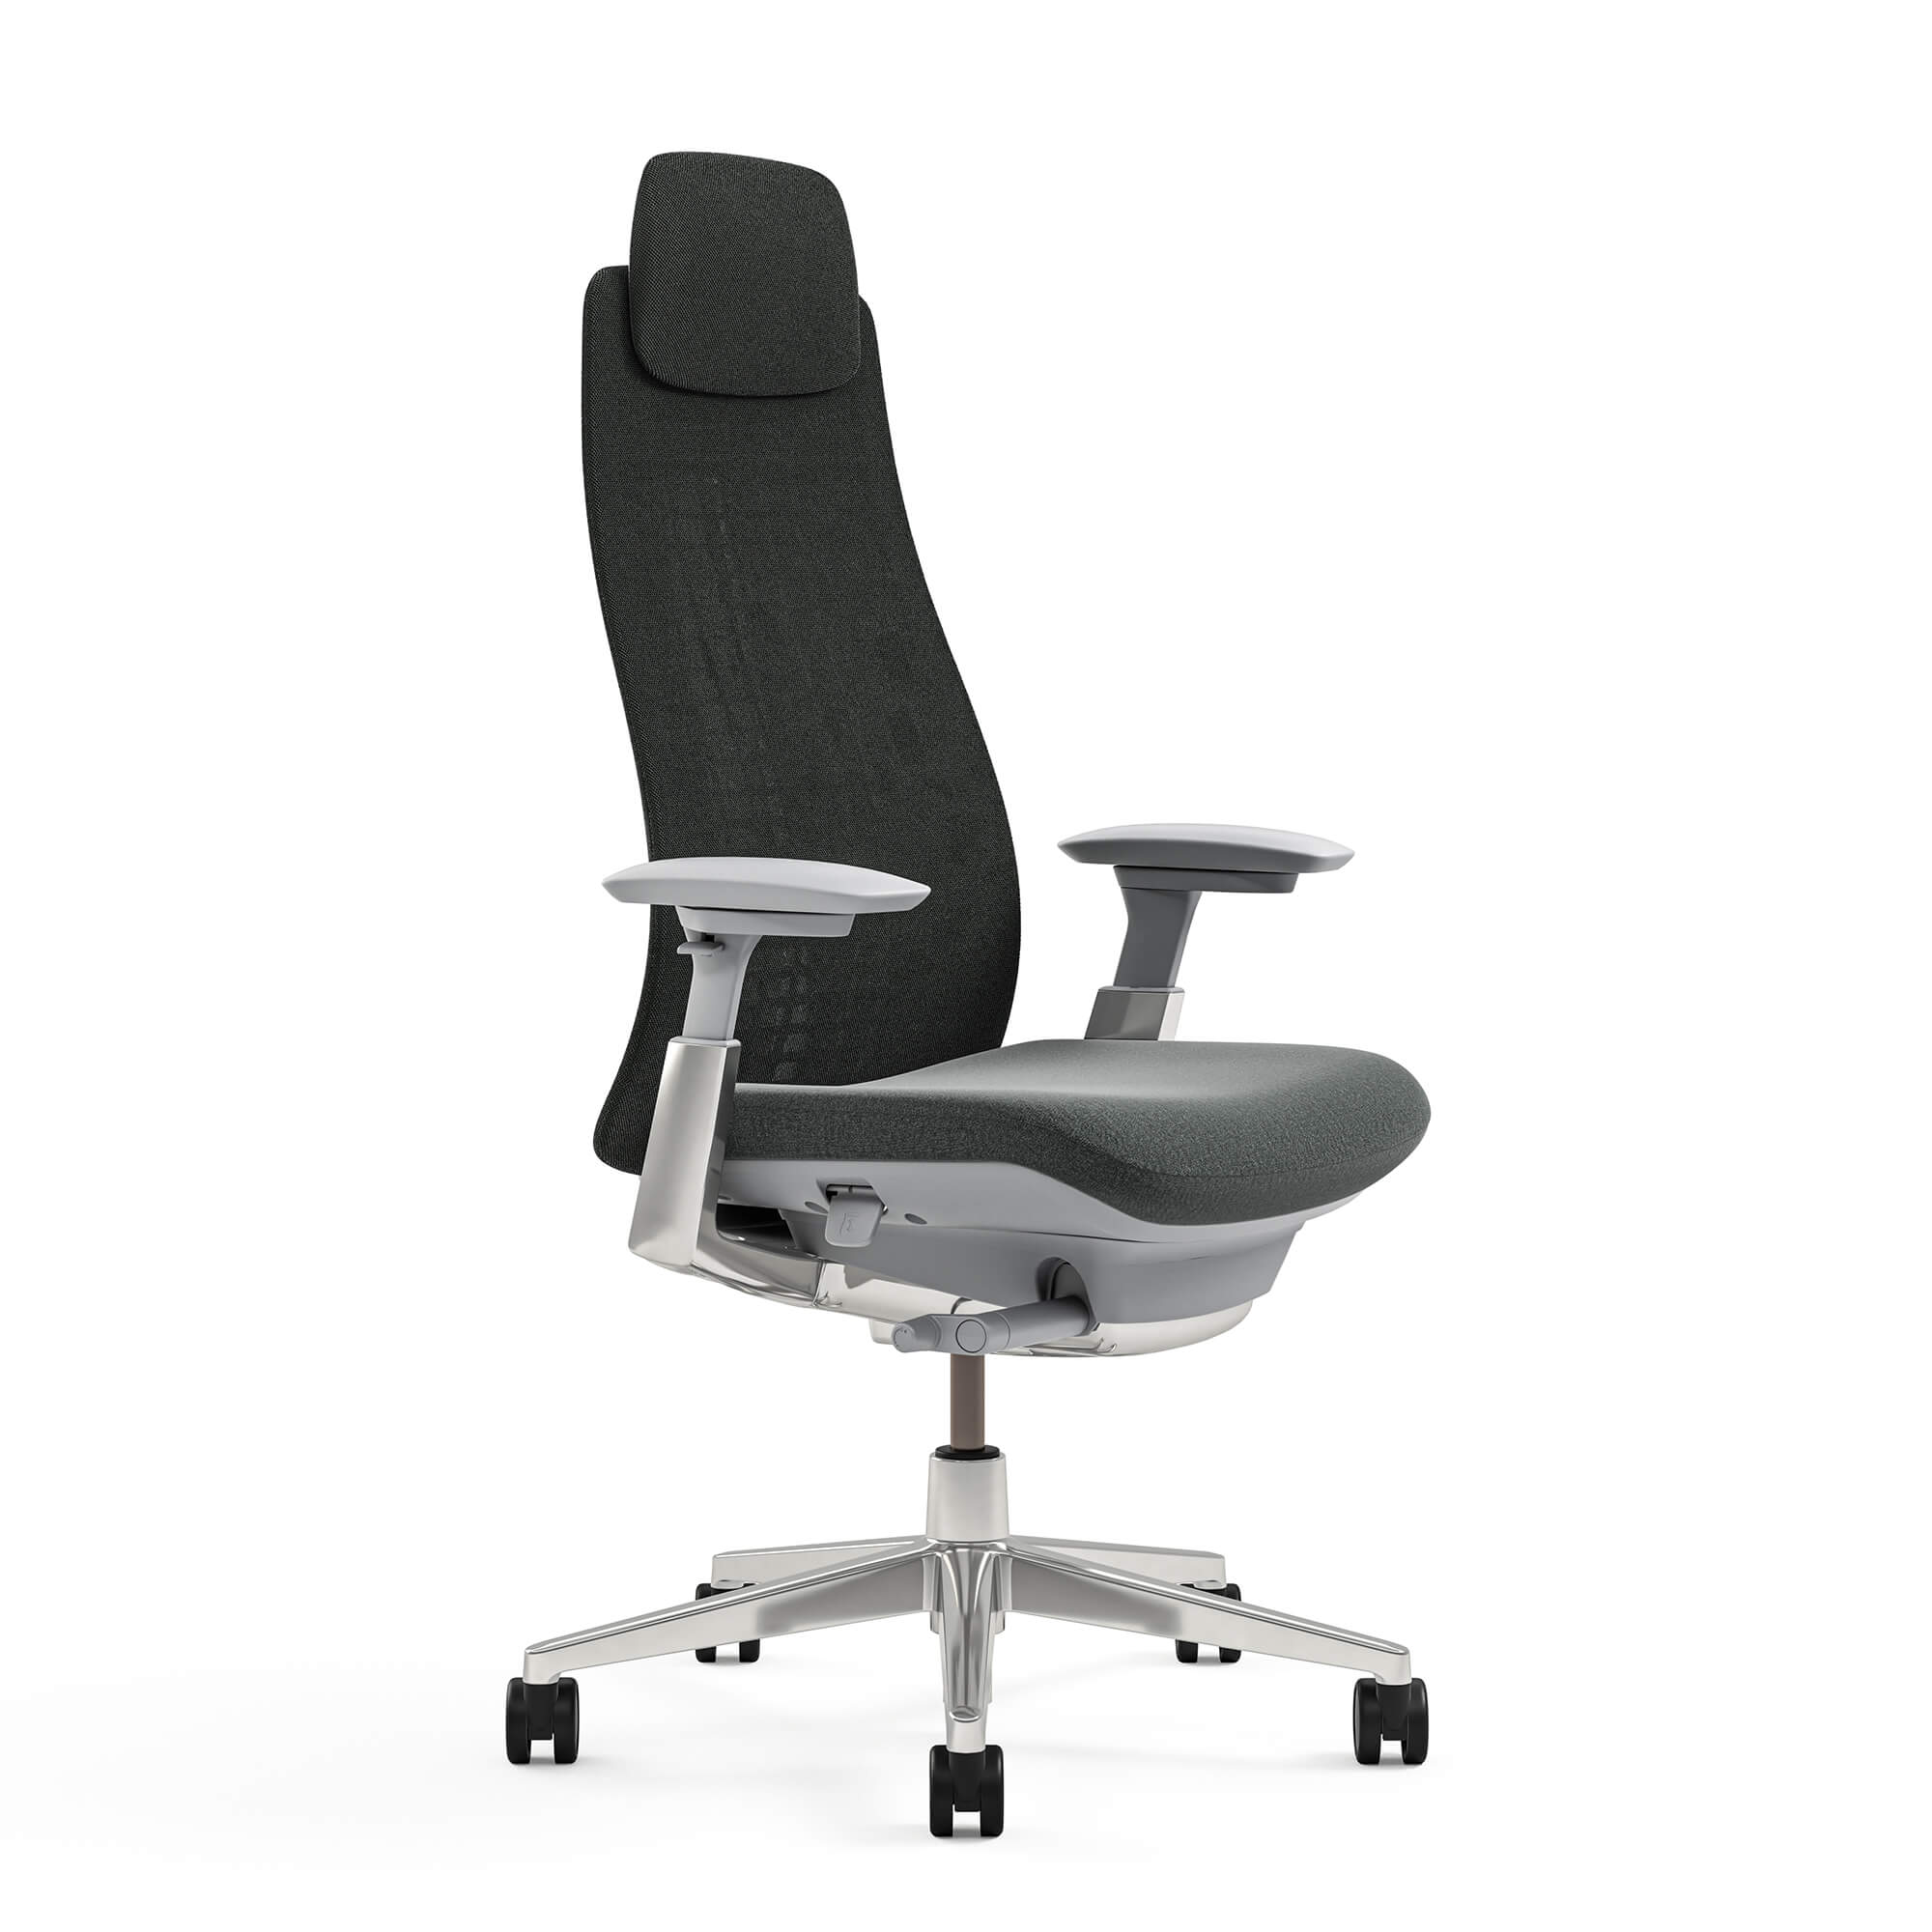 Fern Executive Office Chairs- Atlas 131